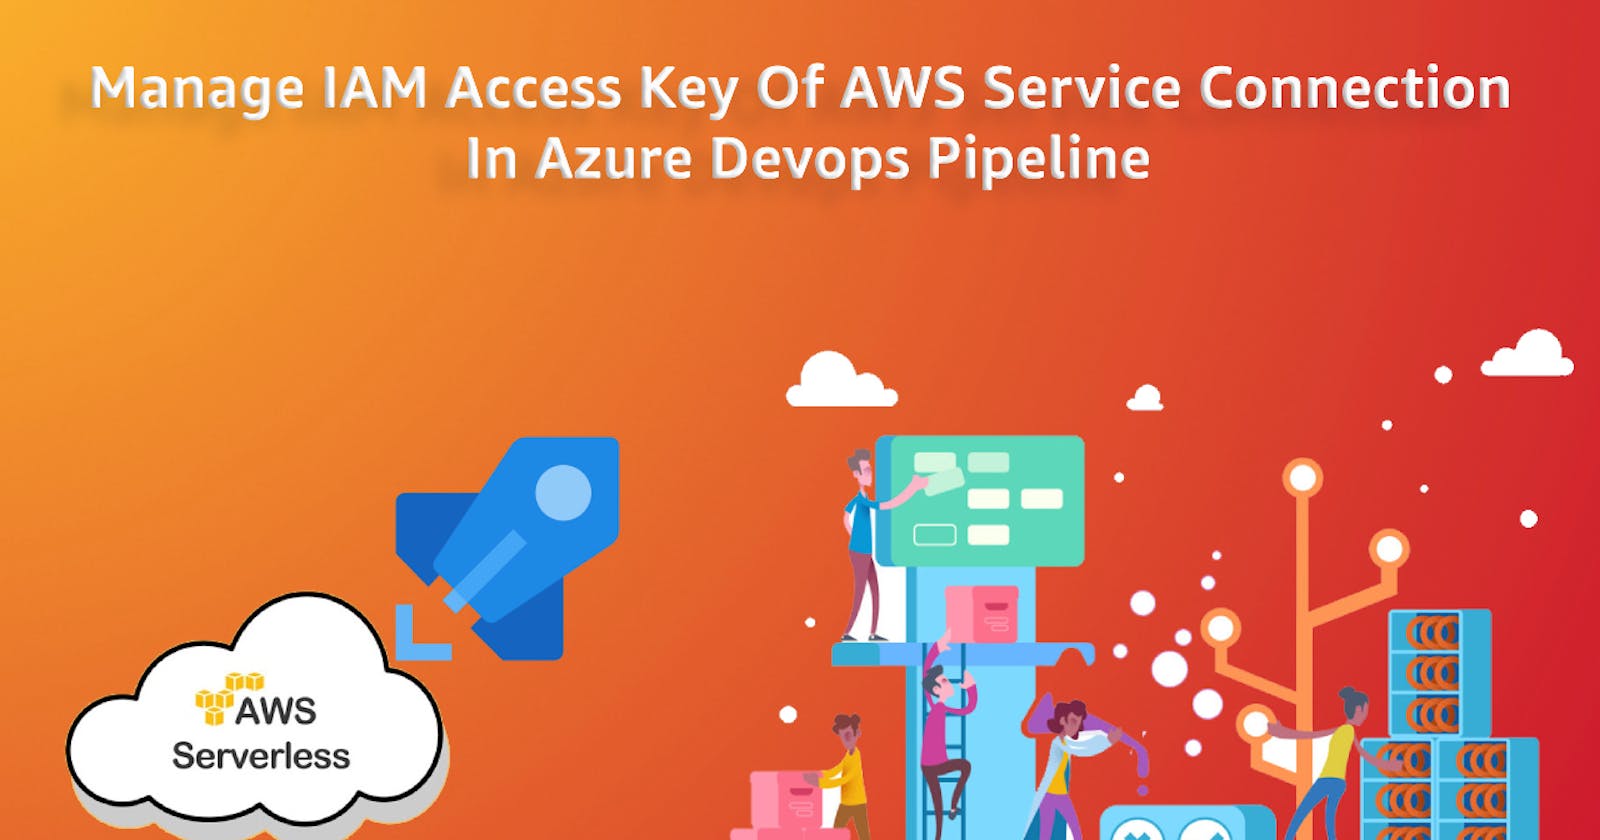 Manage IAM Access Key Of AWS Service Connection In Azure Devops Pipeline